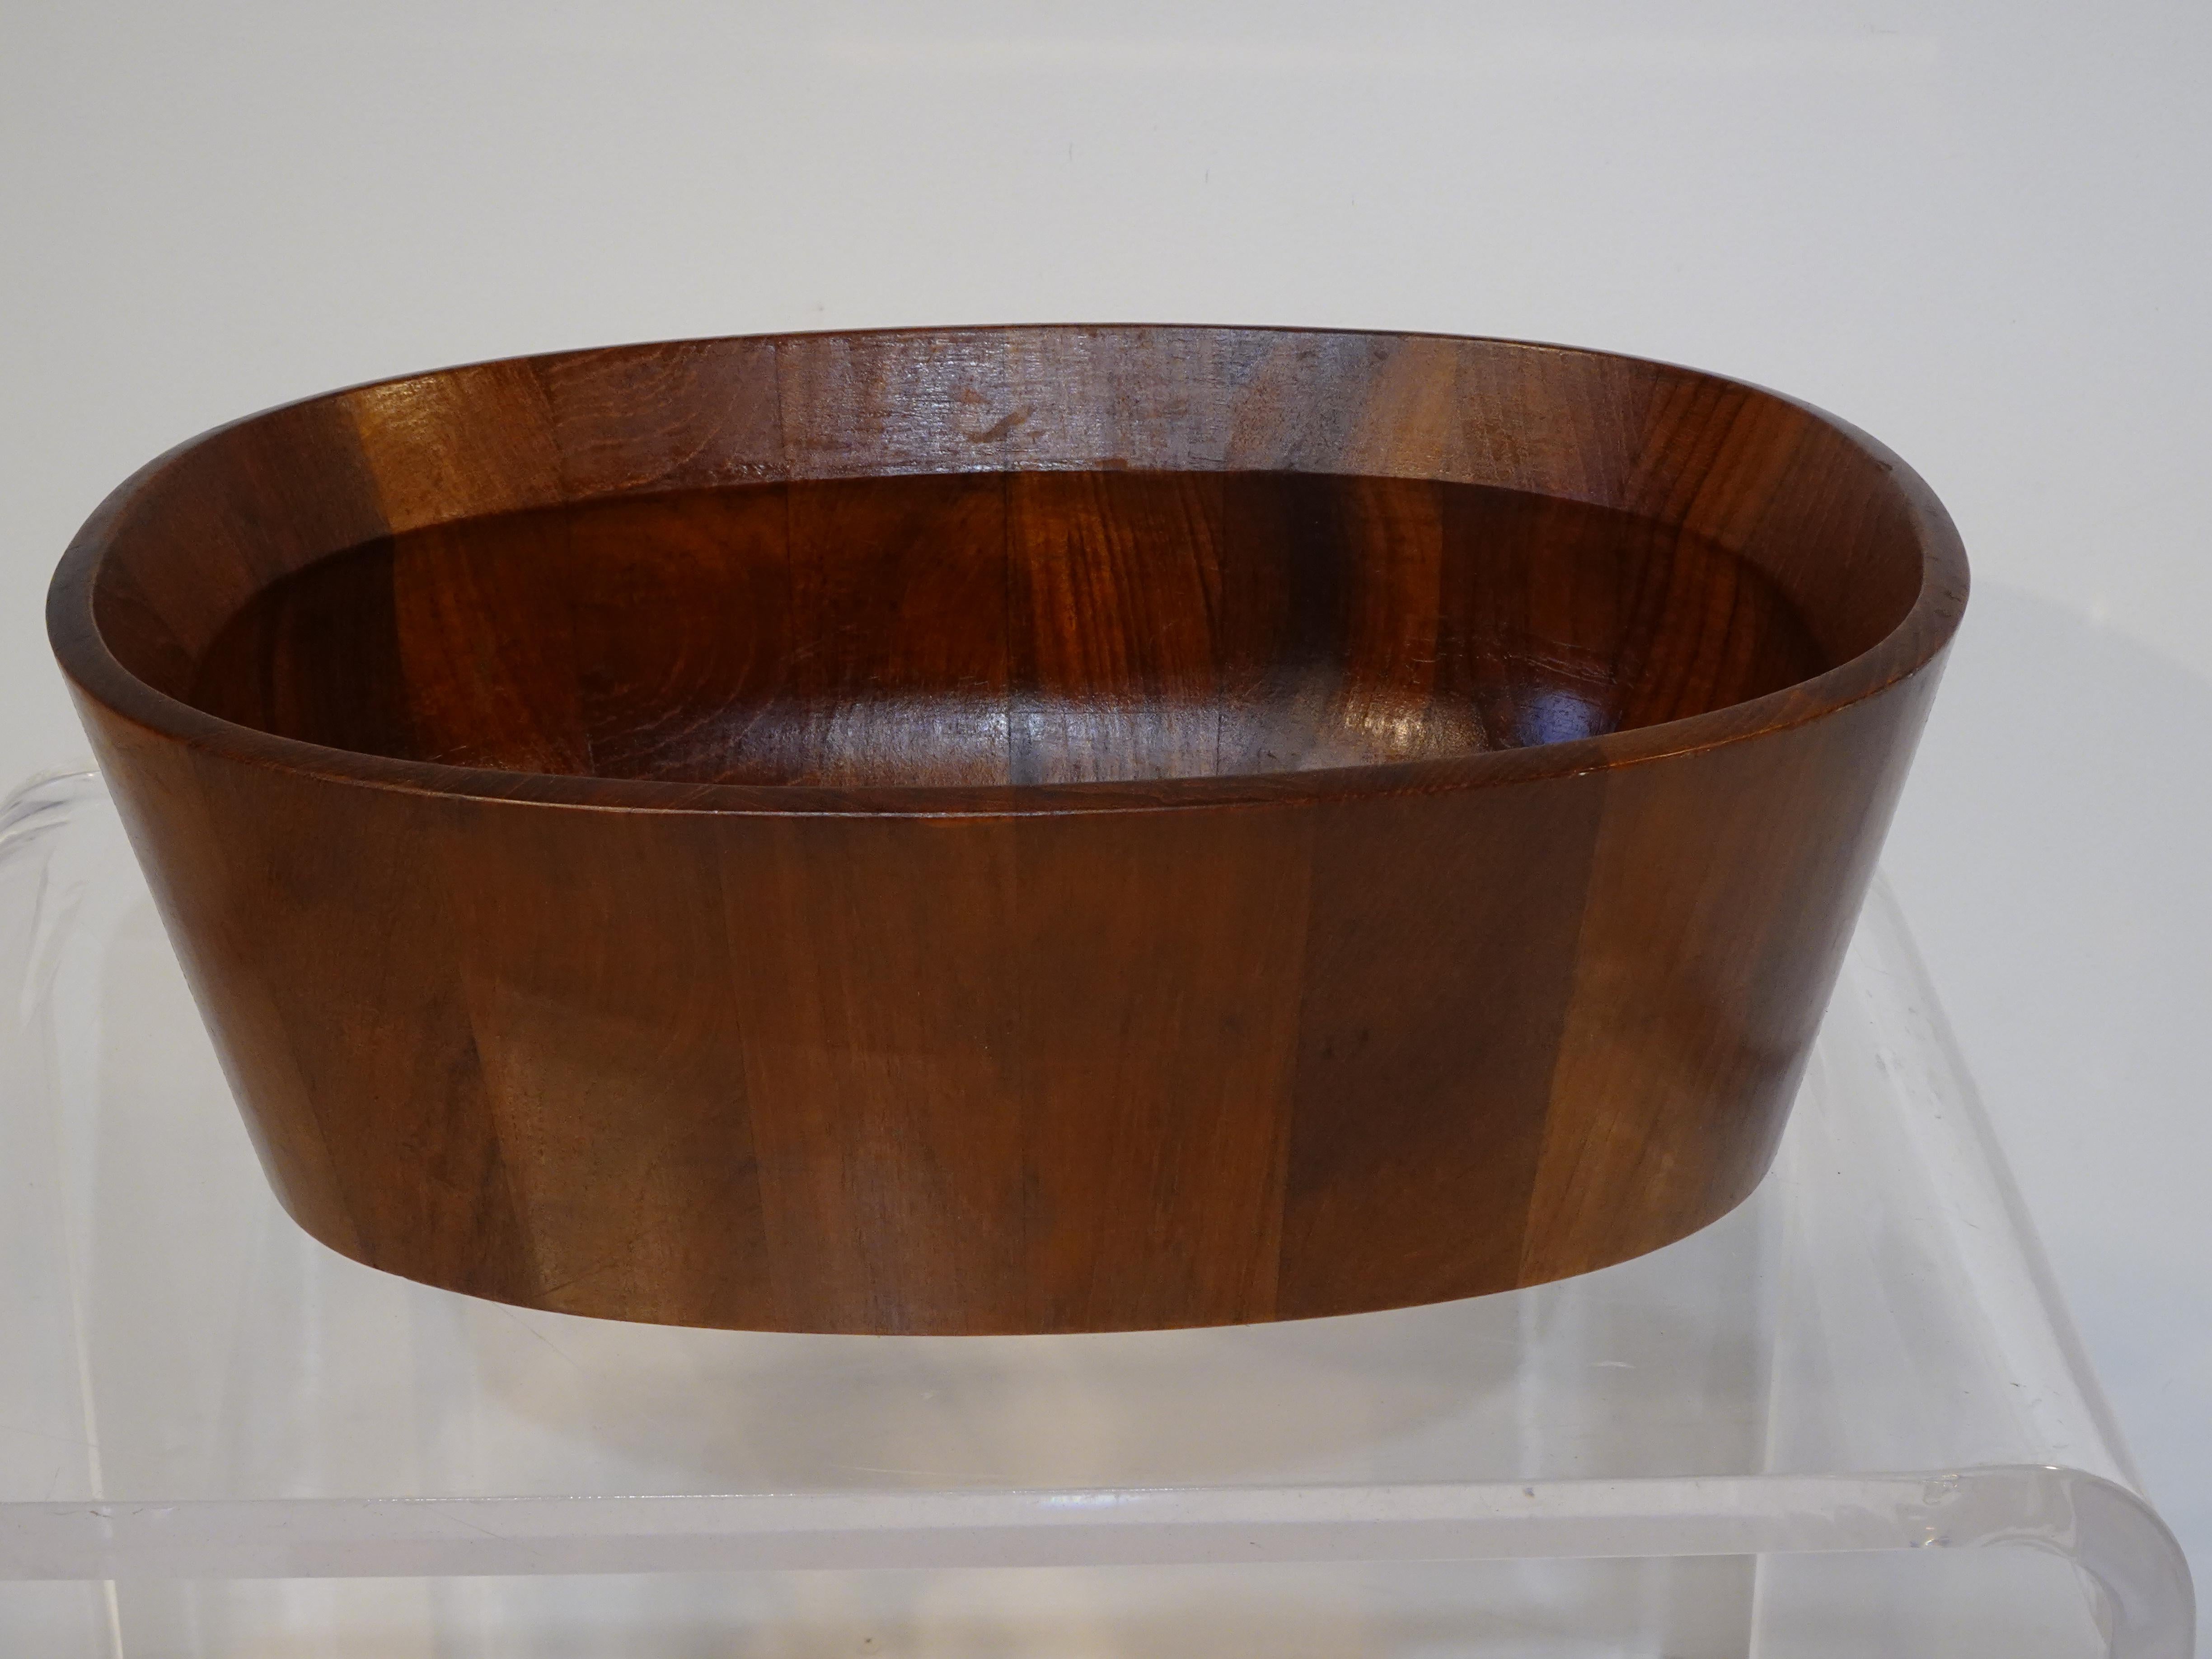 A darker toned teak wood oval shaped bowl designed by Jens H. Quistgaard who is known for his earthy sculptural pepper mills, bowls, serving pieces and furniture. This earlier piece having the 4 duck markings and Dansk Designs Denmark JHQ branded to